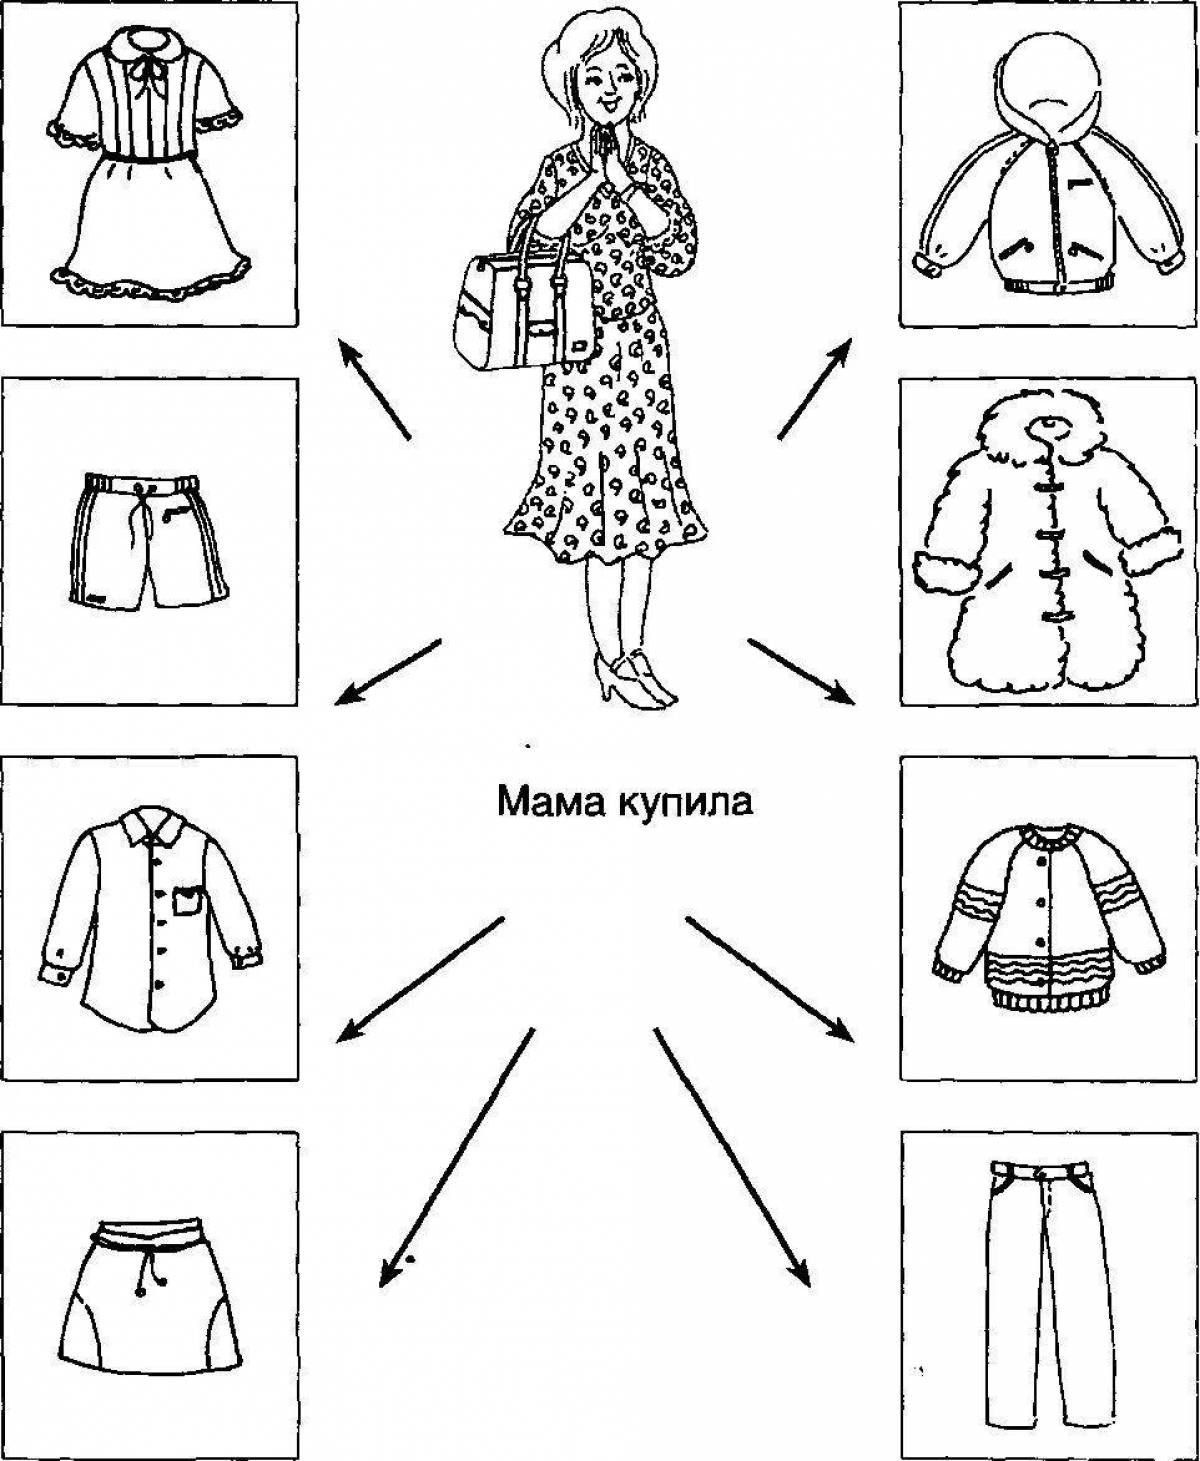 Exciting clothing coloring page